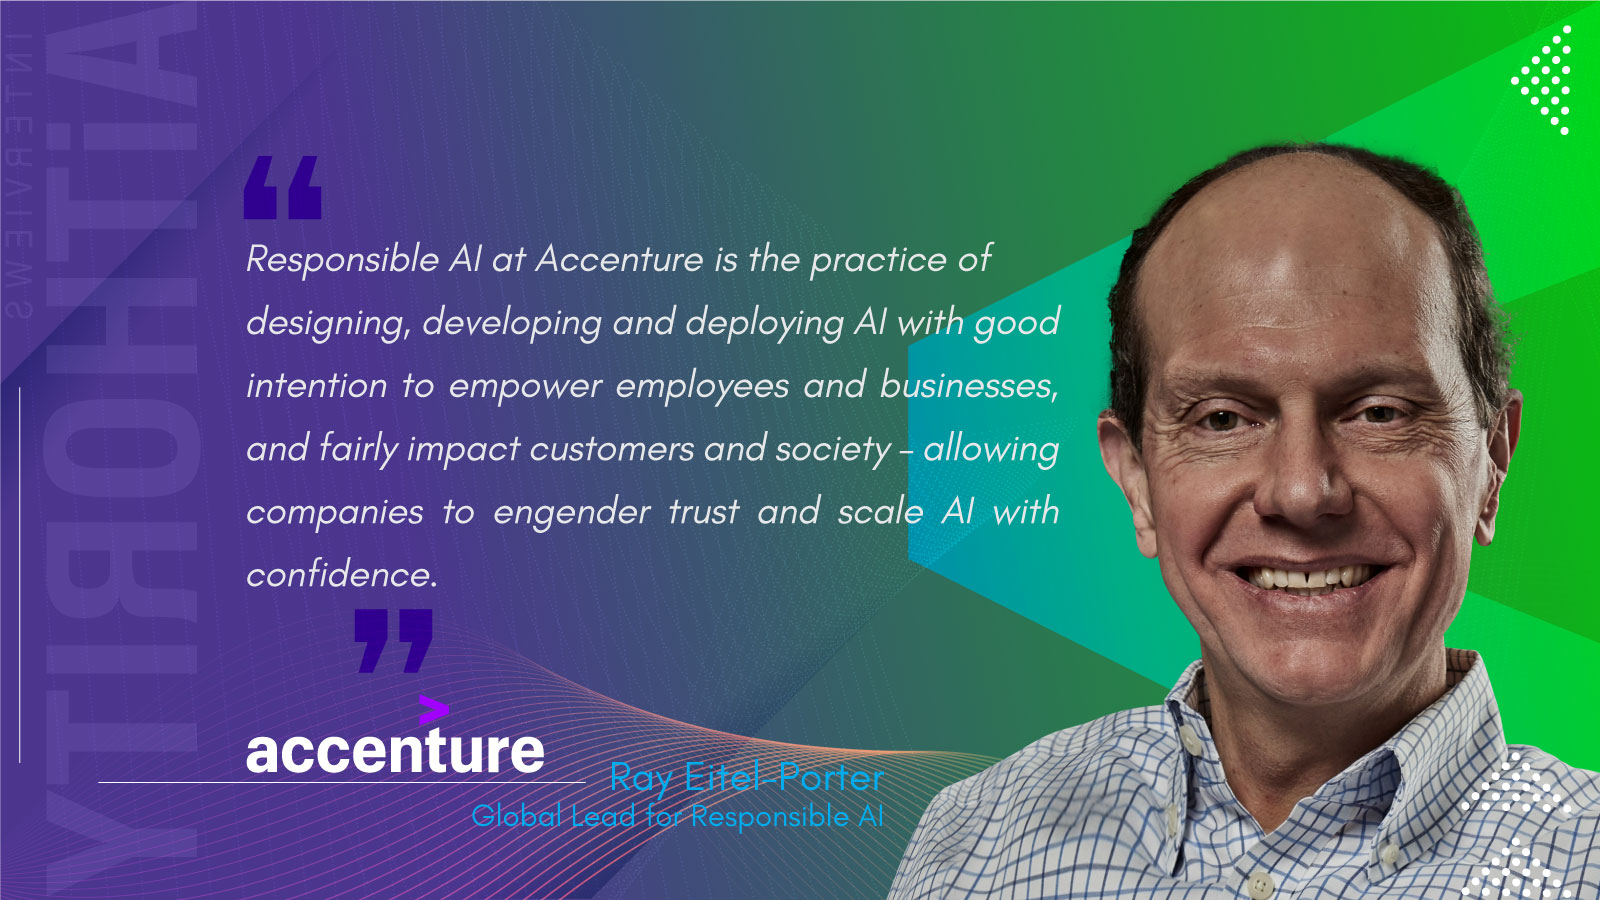 Ray Eitel-Porter, Global Lead for Responsible AI at Accenture